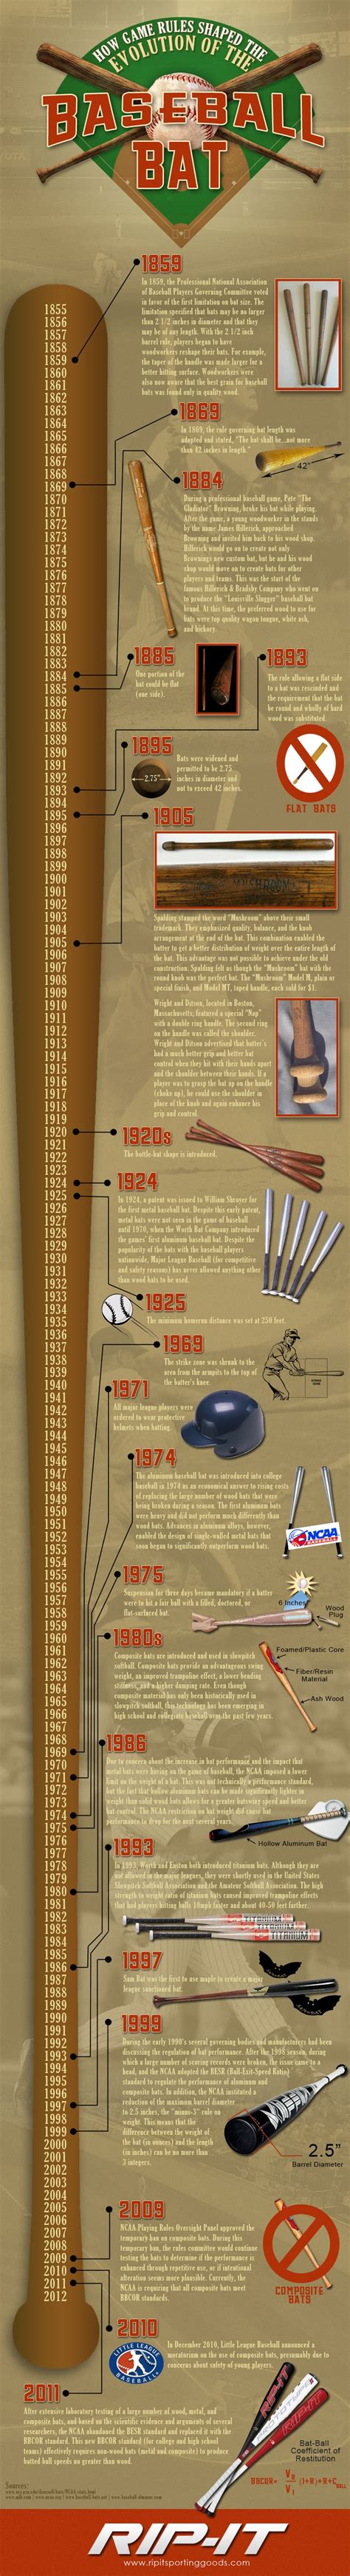 See How The History And Technology Of The Baseball Bat Has Changed Over